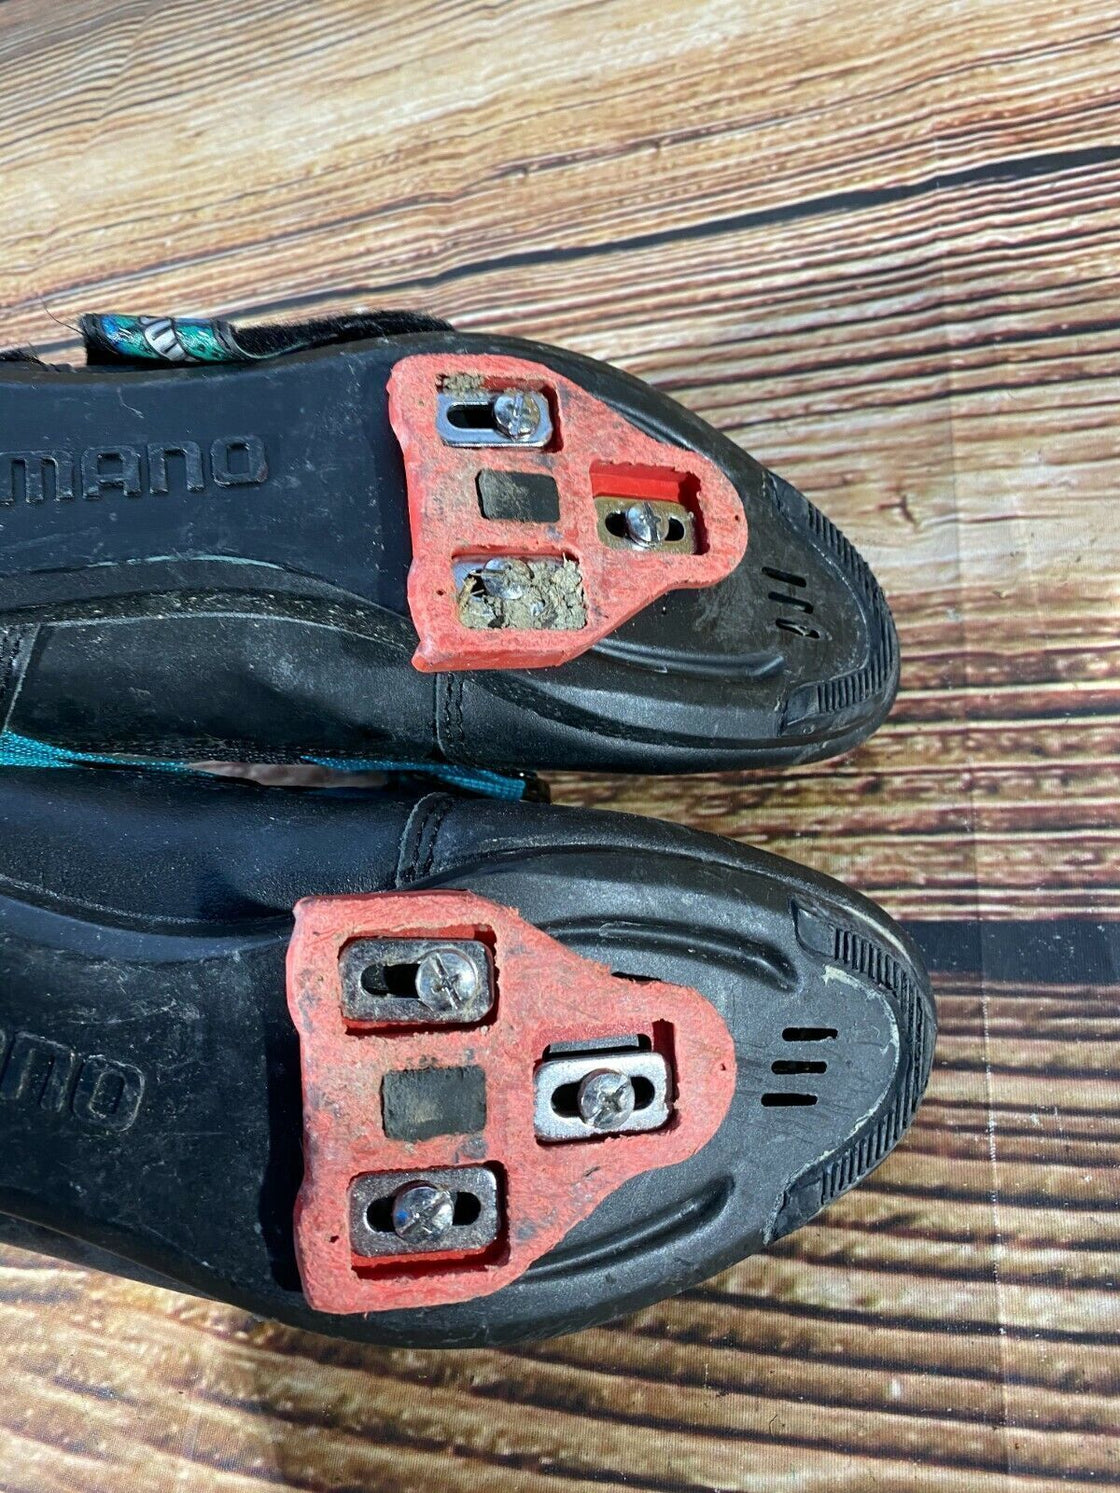 SHIMANO R070 Road Cycling Shoes Clipless Biking Boots Size EU 43 with Cleats